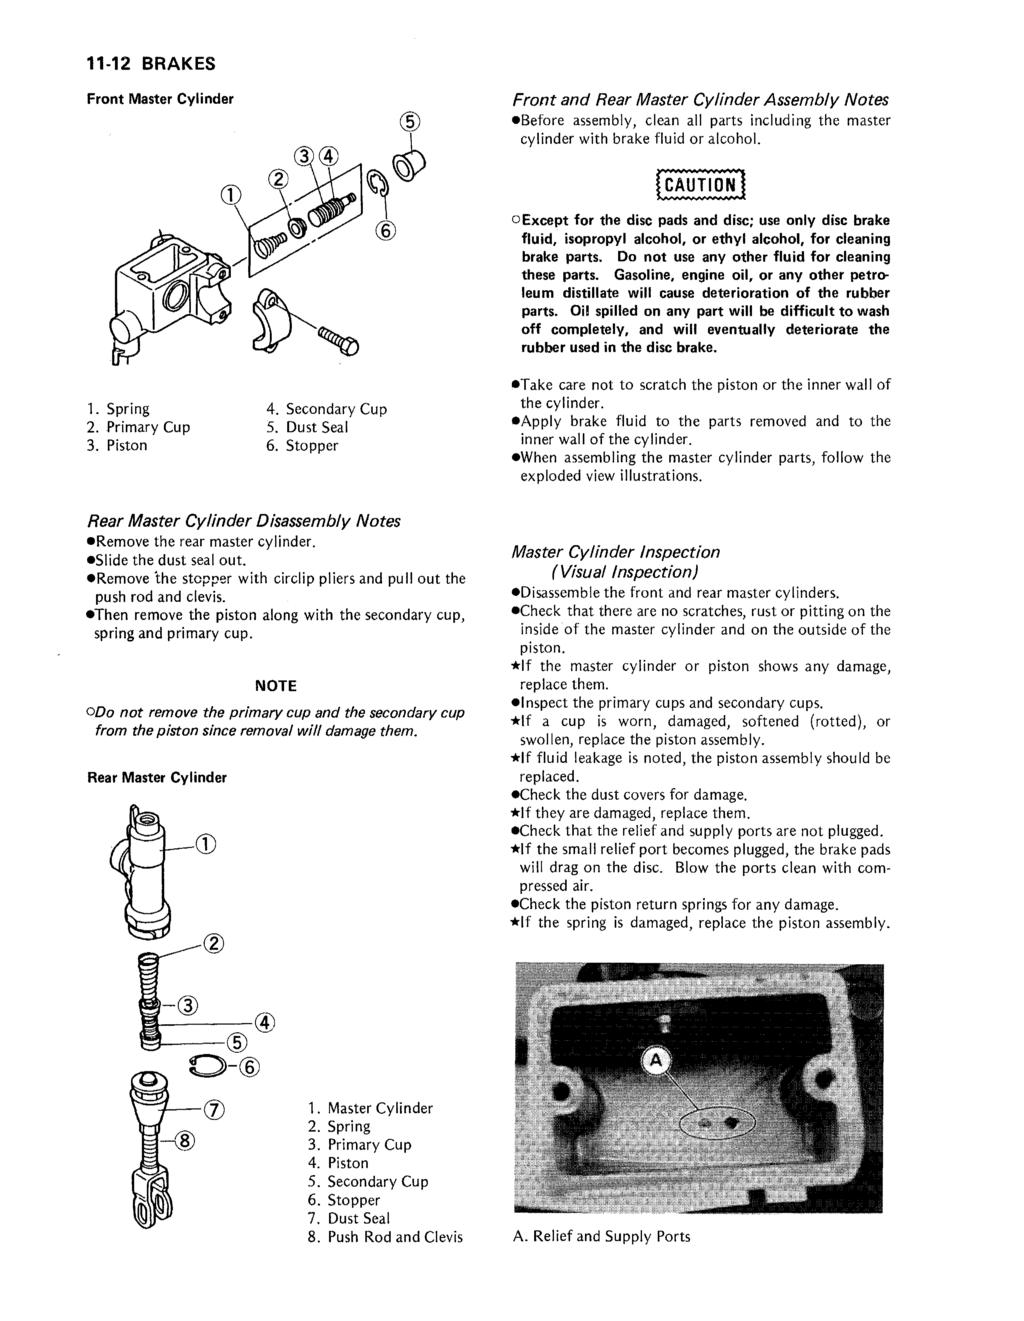 11-12 BRAKES Front Master Cylinder Front and Rear Master Cylinder Assembly Notes Before assembly, clean all parts including the master cylinder with brake fluid or alcohol.